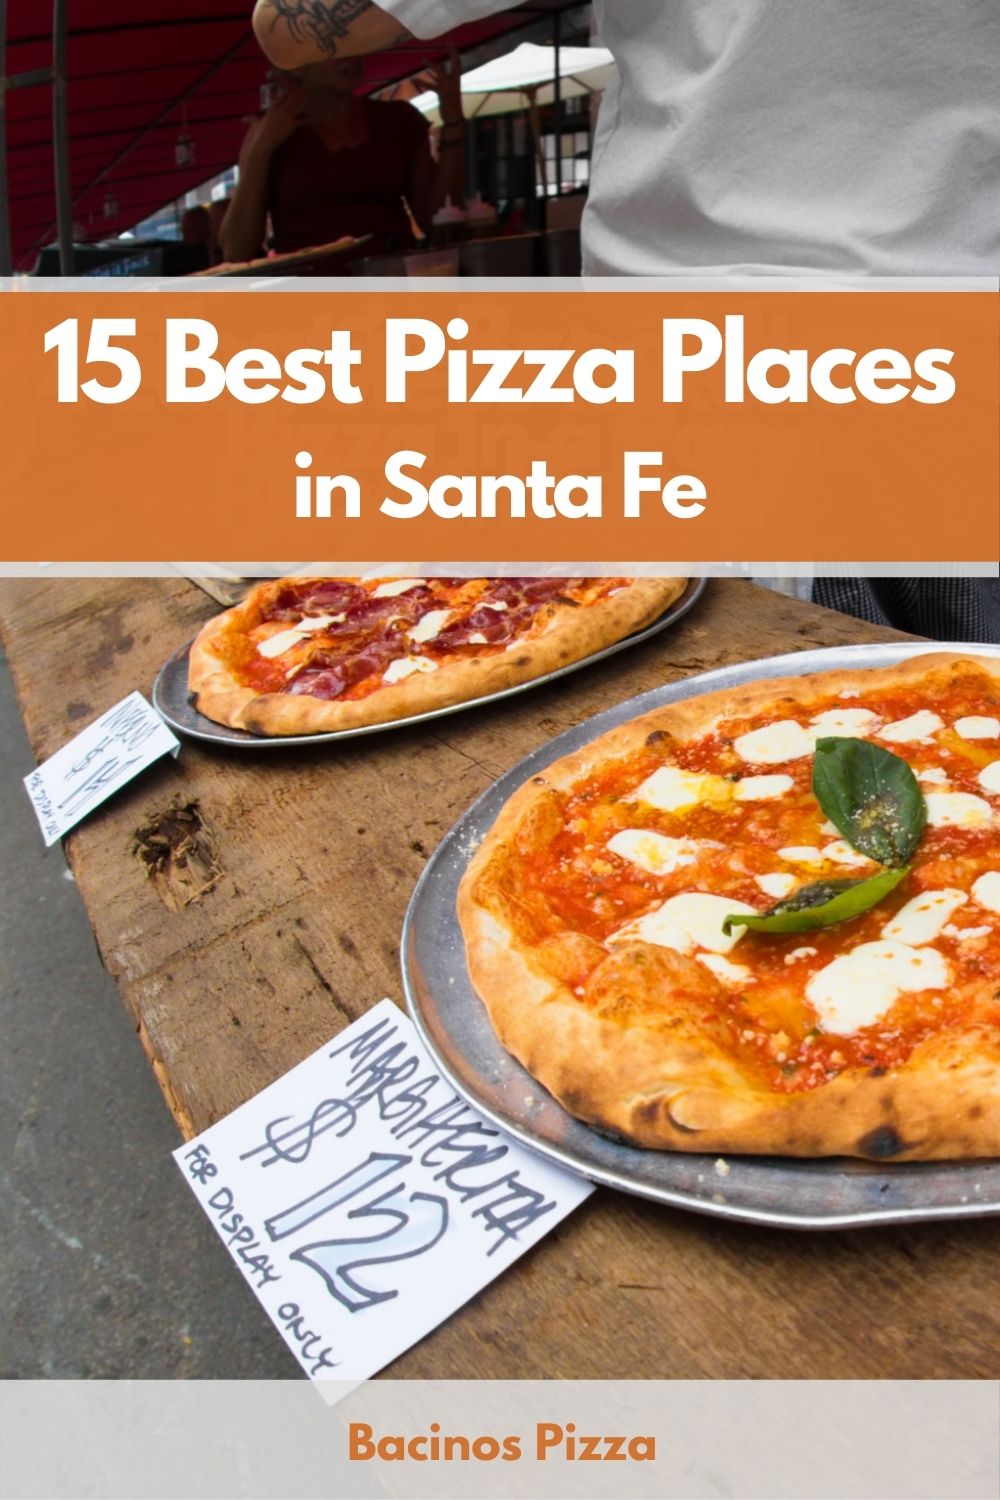 15 Best Pizza Places in Santa Fe pin 2